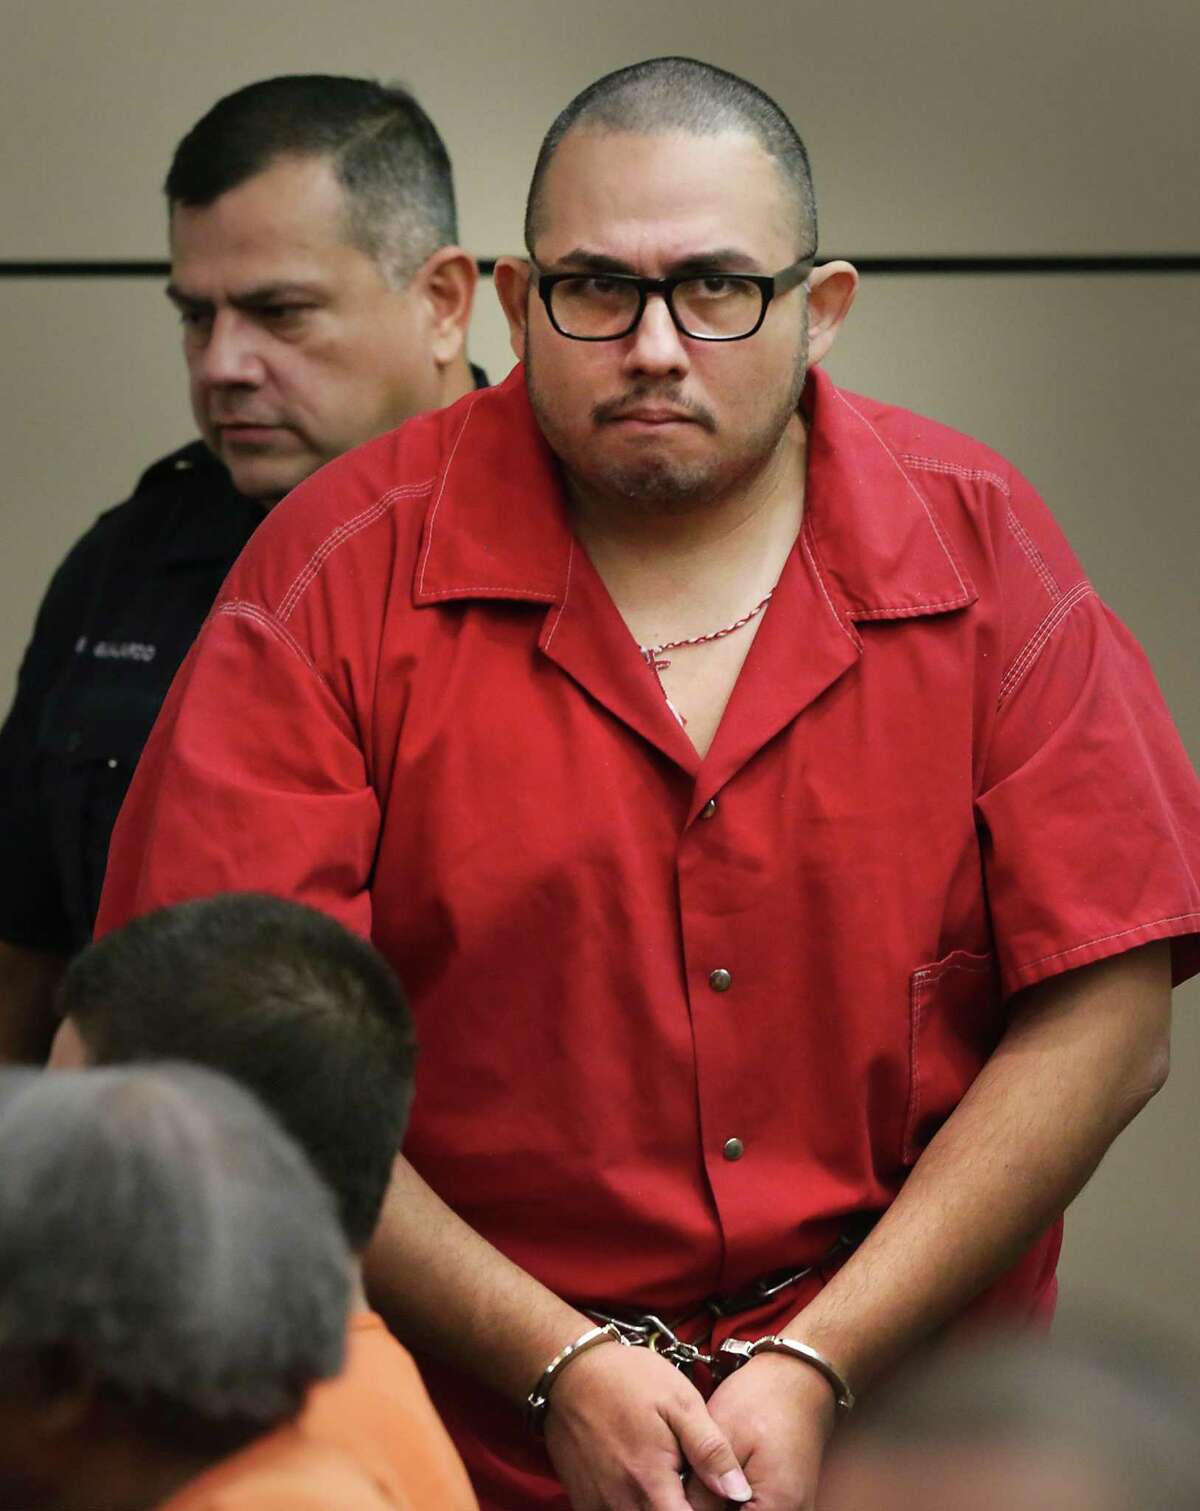 Jose “Joe” Baldomero Flores III pleaded guilty to murder Monday in the deaths of Heather Ann Willms and Esmeralda Herrera. He was sentenced to three life terms.